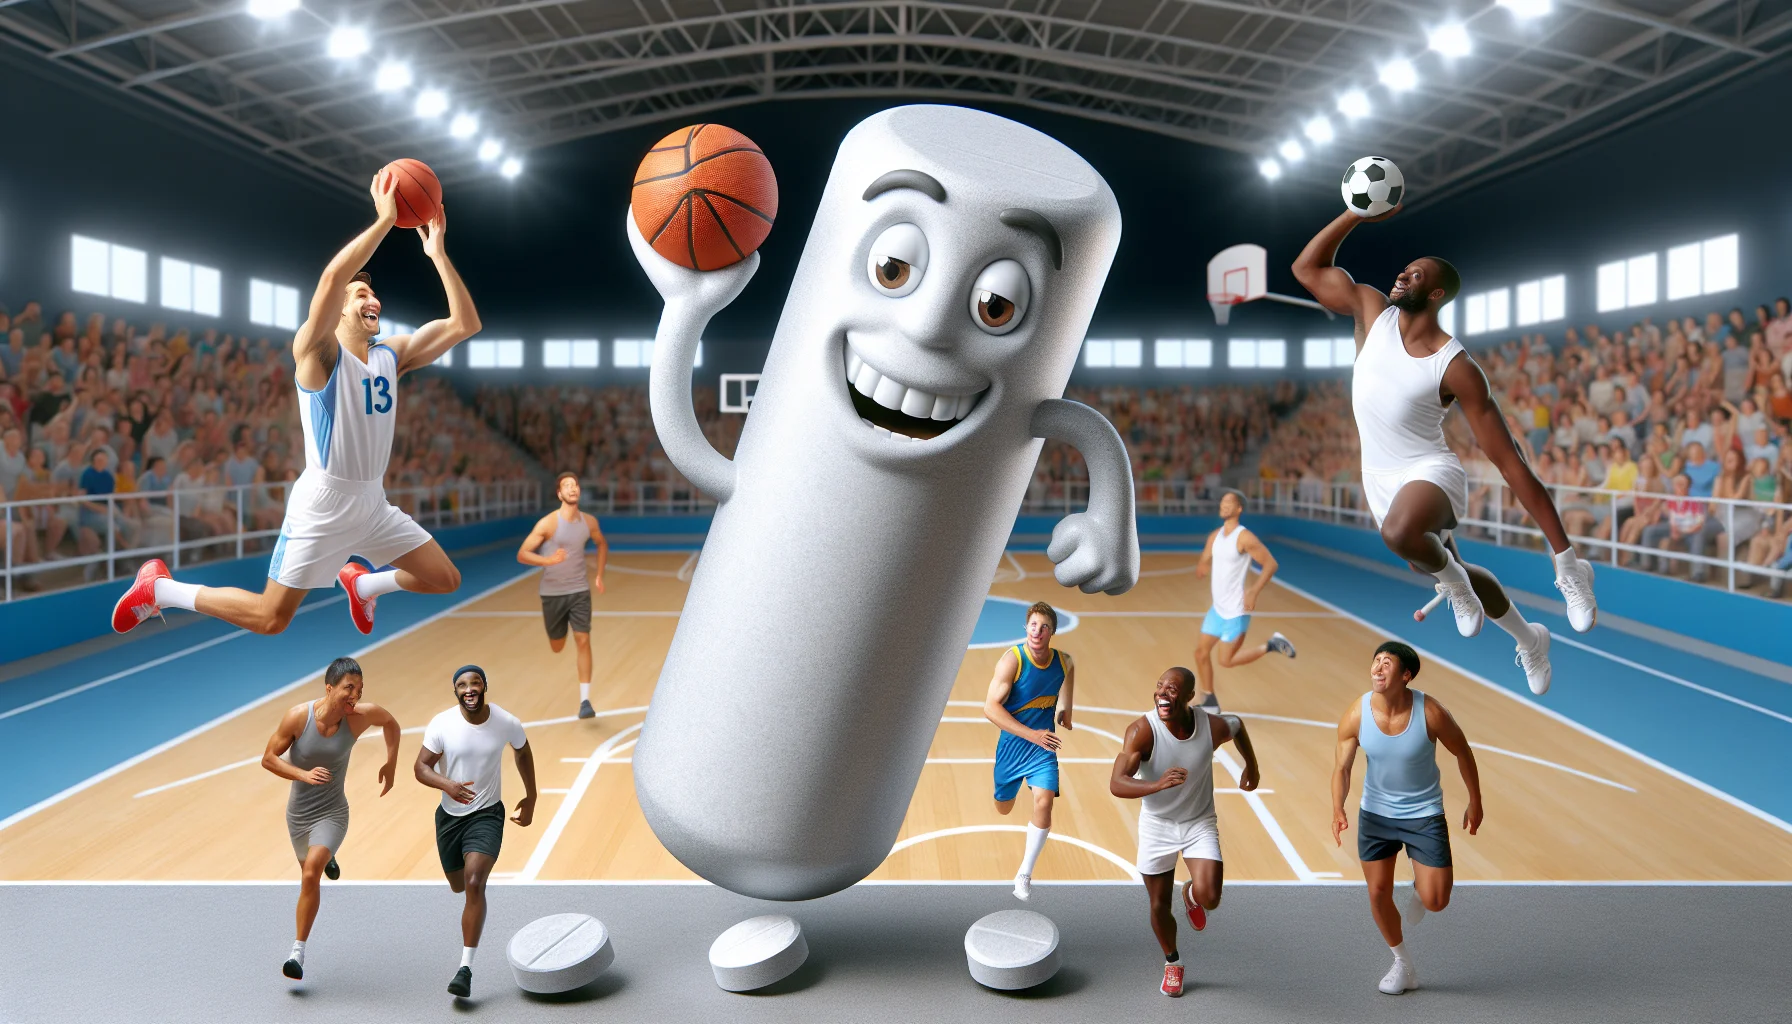 Imagine a humorous scene that is designed to encourage people to use magnesium supplements for sports. In this scene, picture a realistic, oversized magnesium supplement stick with anthropomorphic features like eyes and a smiling face. The stick gleefully participates in various sports activities, such as basketball, soccer, and running. It's depicted outperforming human athletes, who are in awe of its vitality and energy. To ensure an inclusive display, the athletes should be a mixture of genders and descents, including Hispanic males, Caucasian females, Black males, and East Asian females.